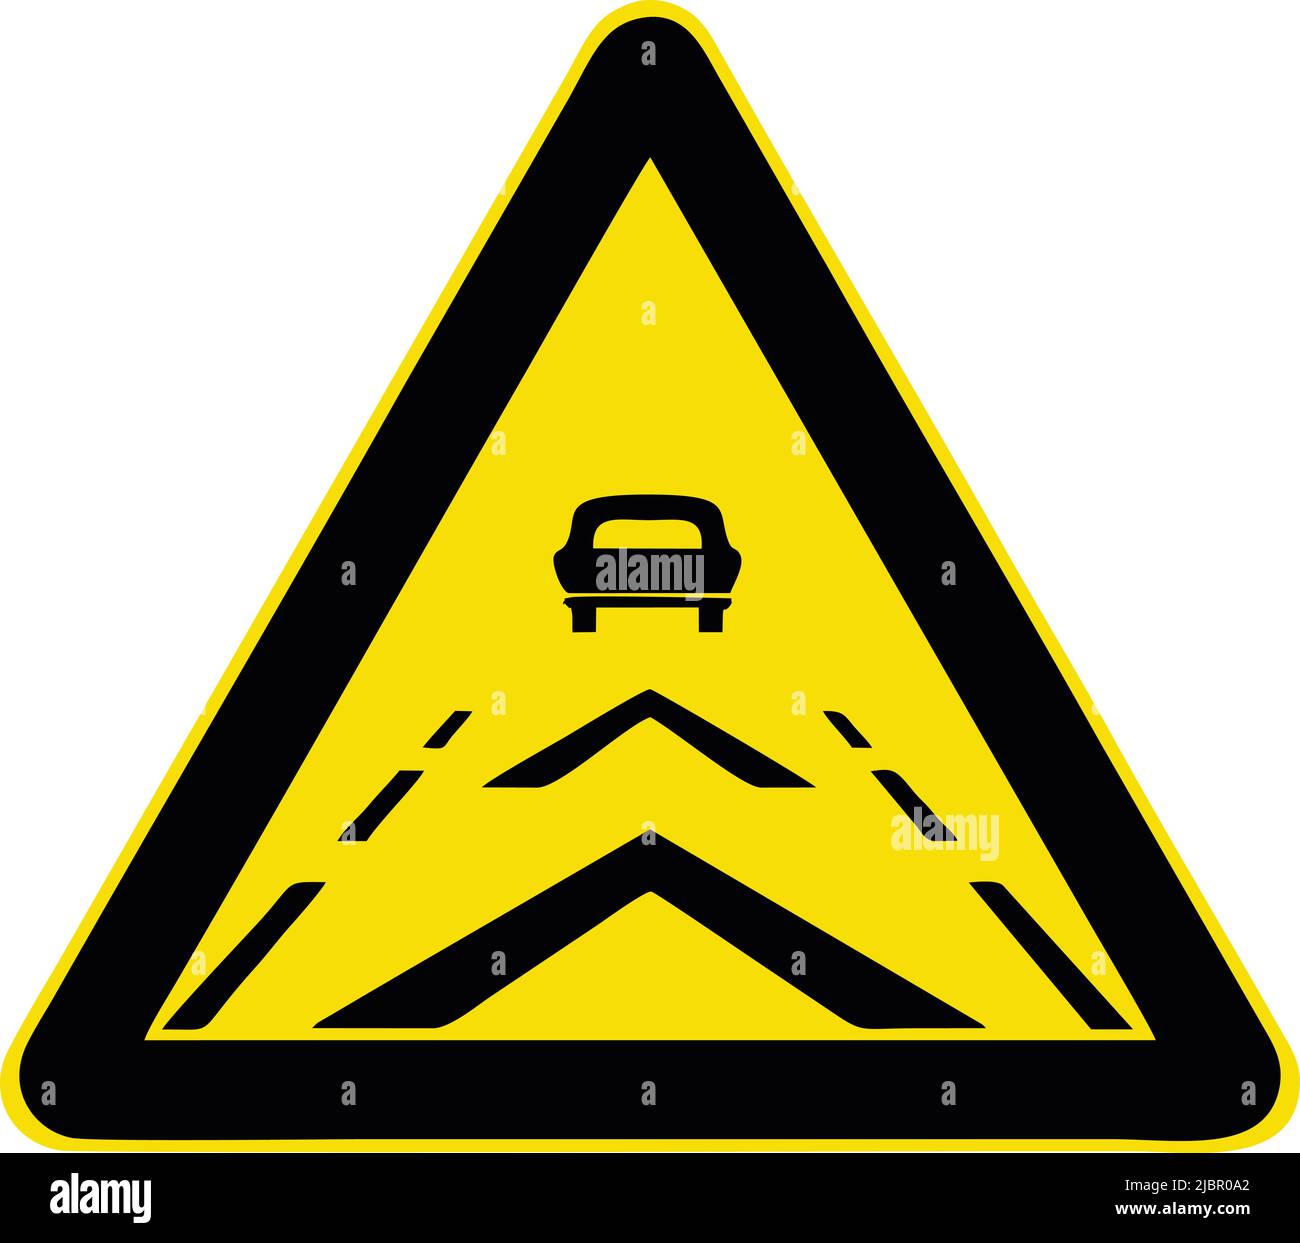 Keep a safe distance, Gallery of All Warning Signs, Road signs in China Stock Vector